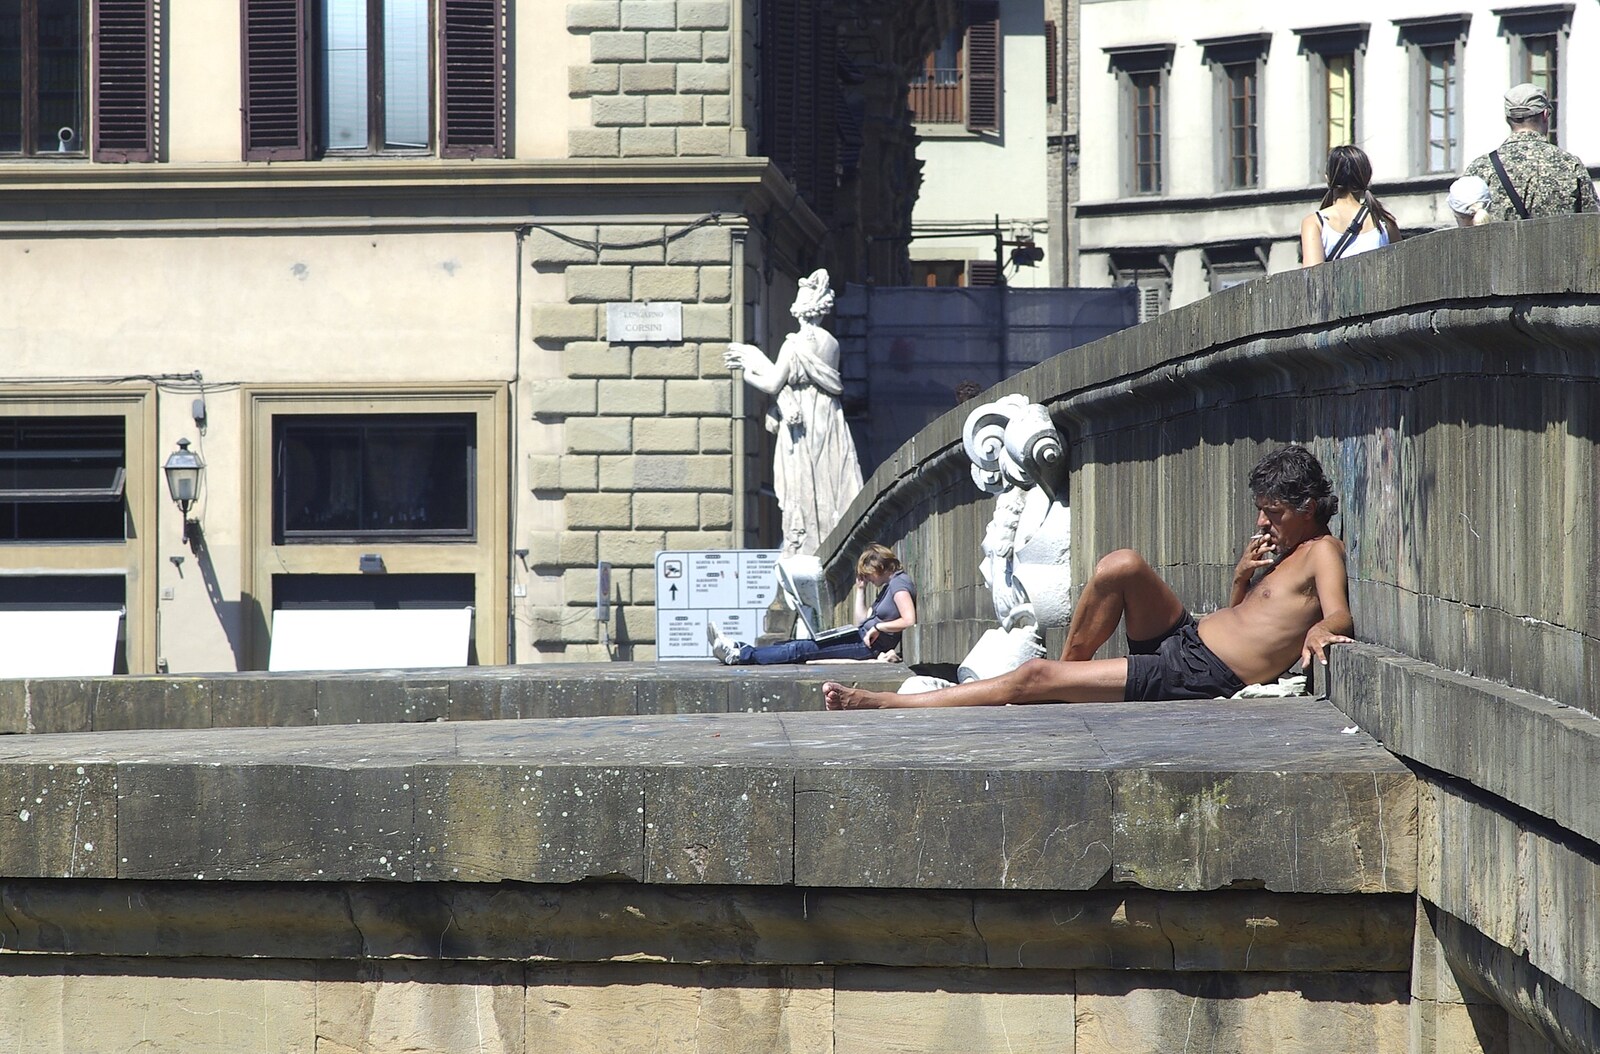 A dude chills out with a fag on a bridge from A Day Trip to Firenze, Tuscany, Italy - 24th July 2008